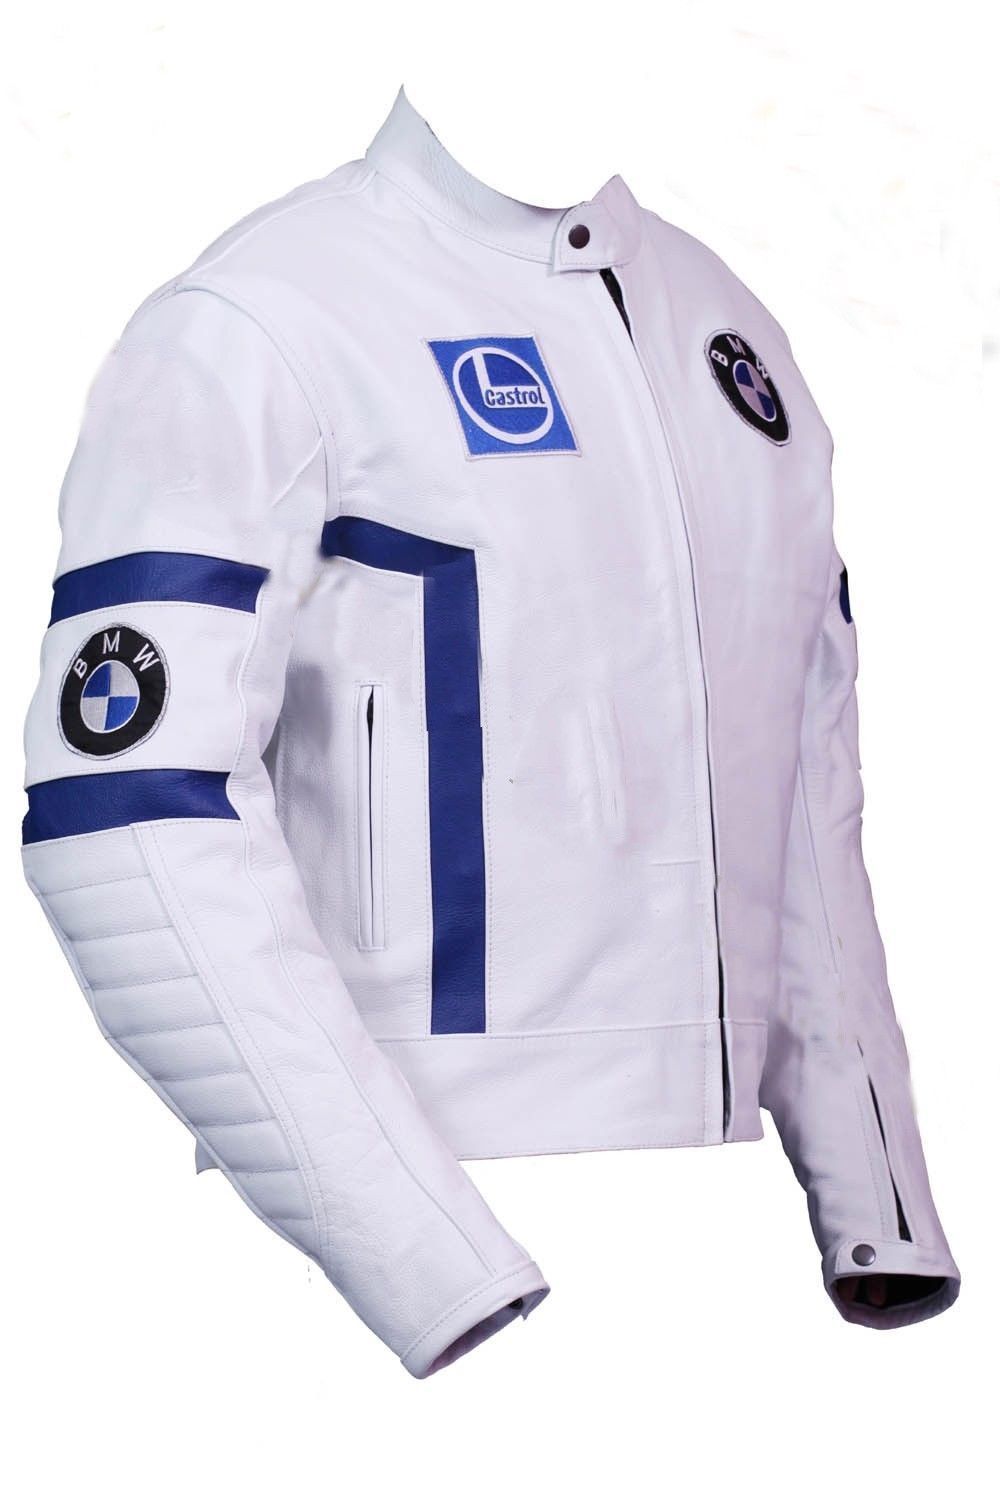 Mens White BMW Motorcycle Racing Biker Leather Jacket XS - Outerwear